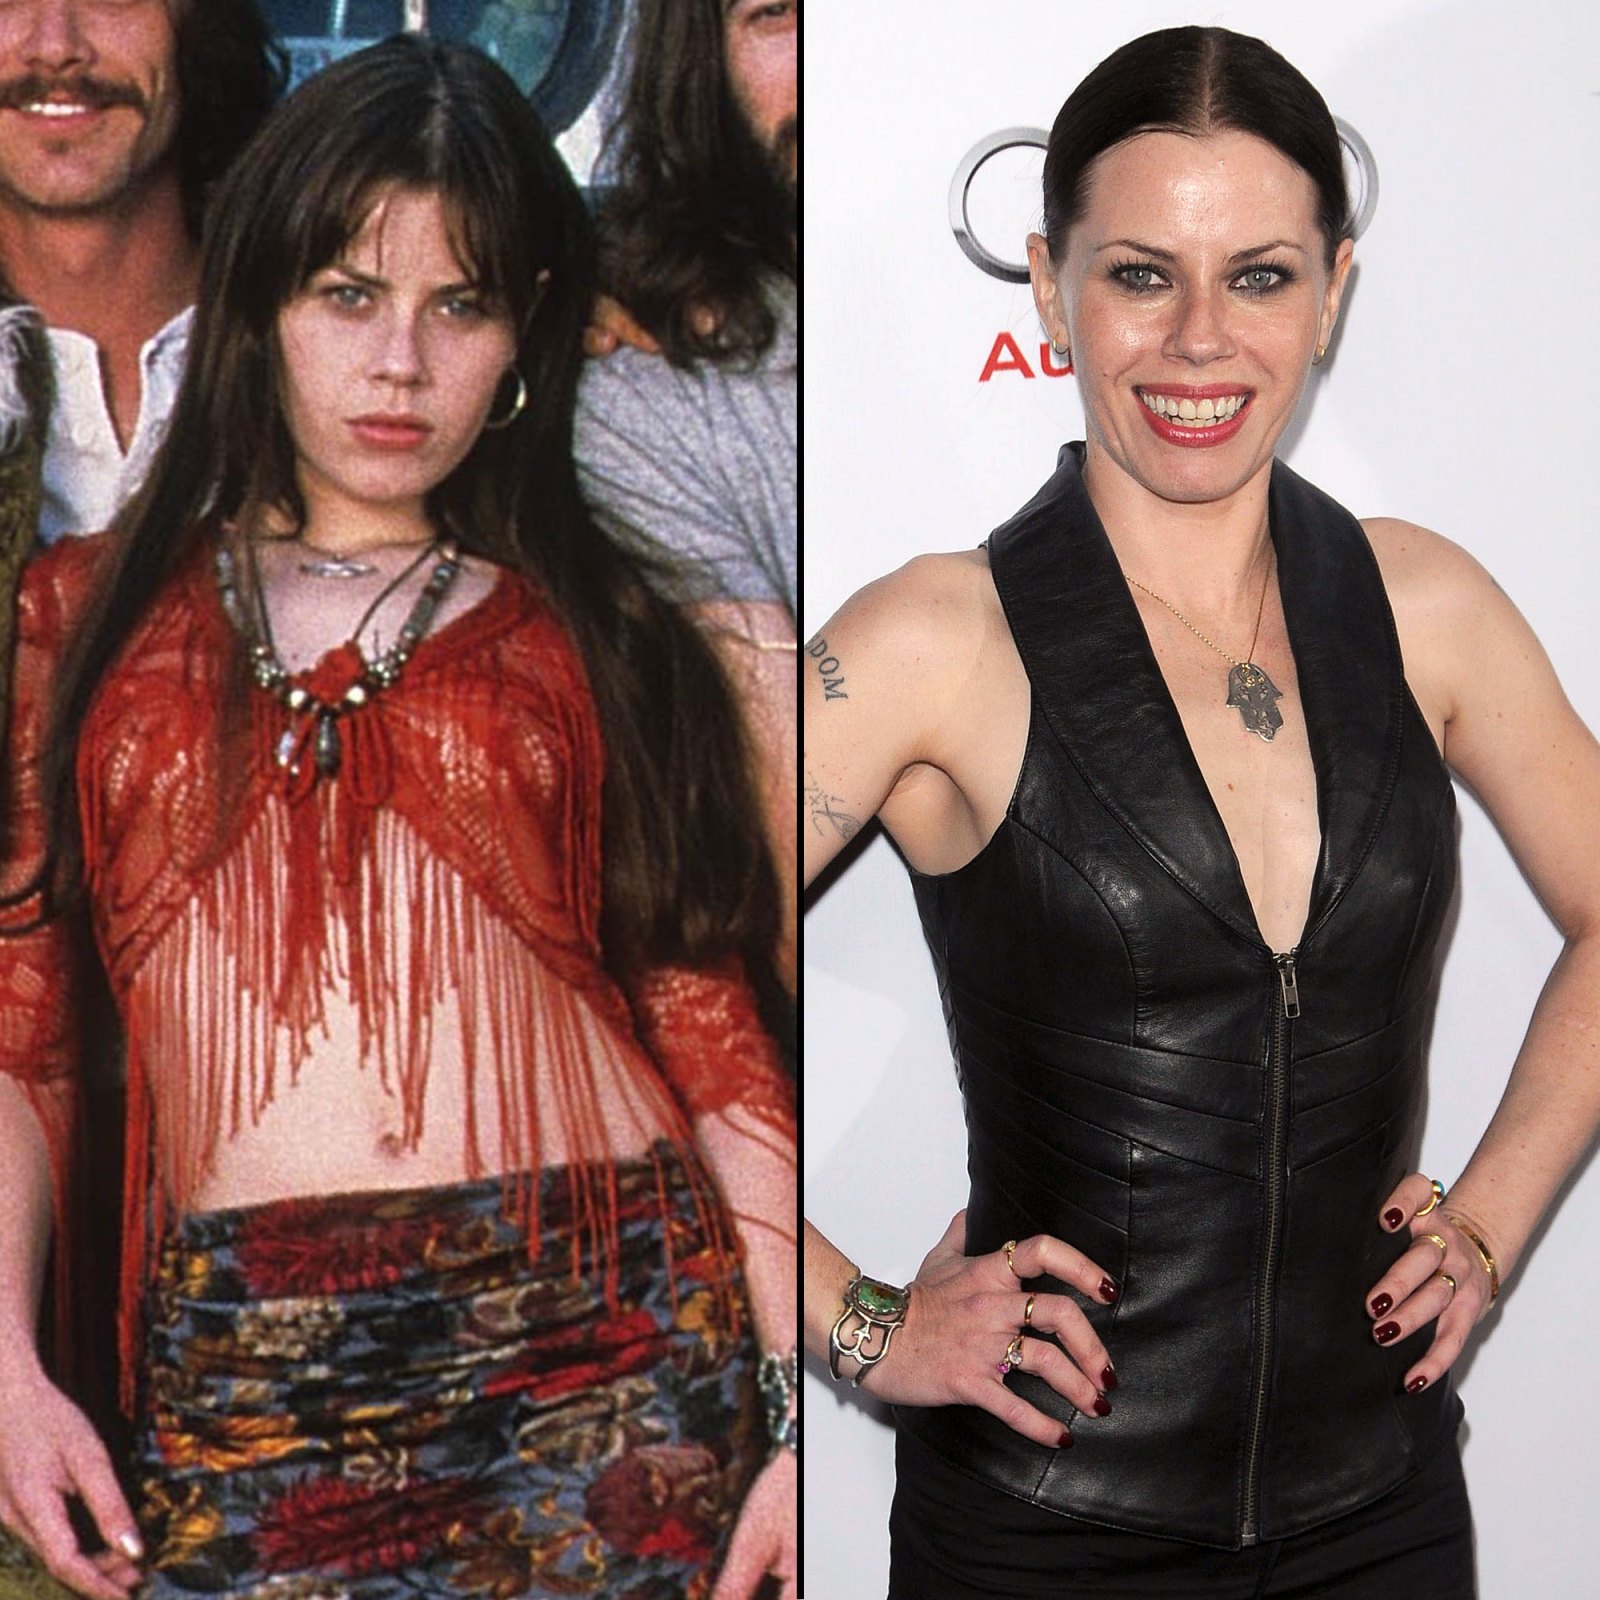 Fairuza Balk Almost Famous Cast Where Are They Now